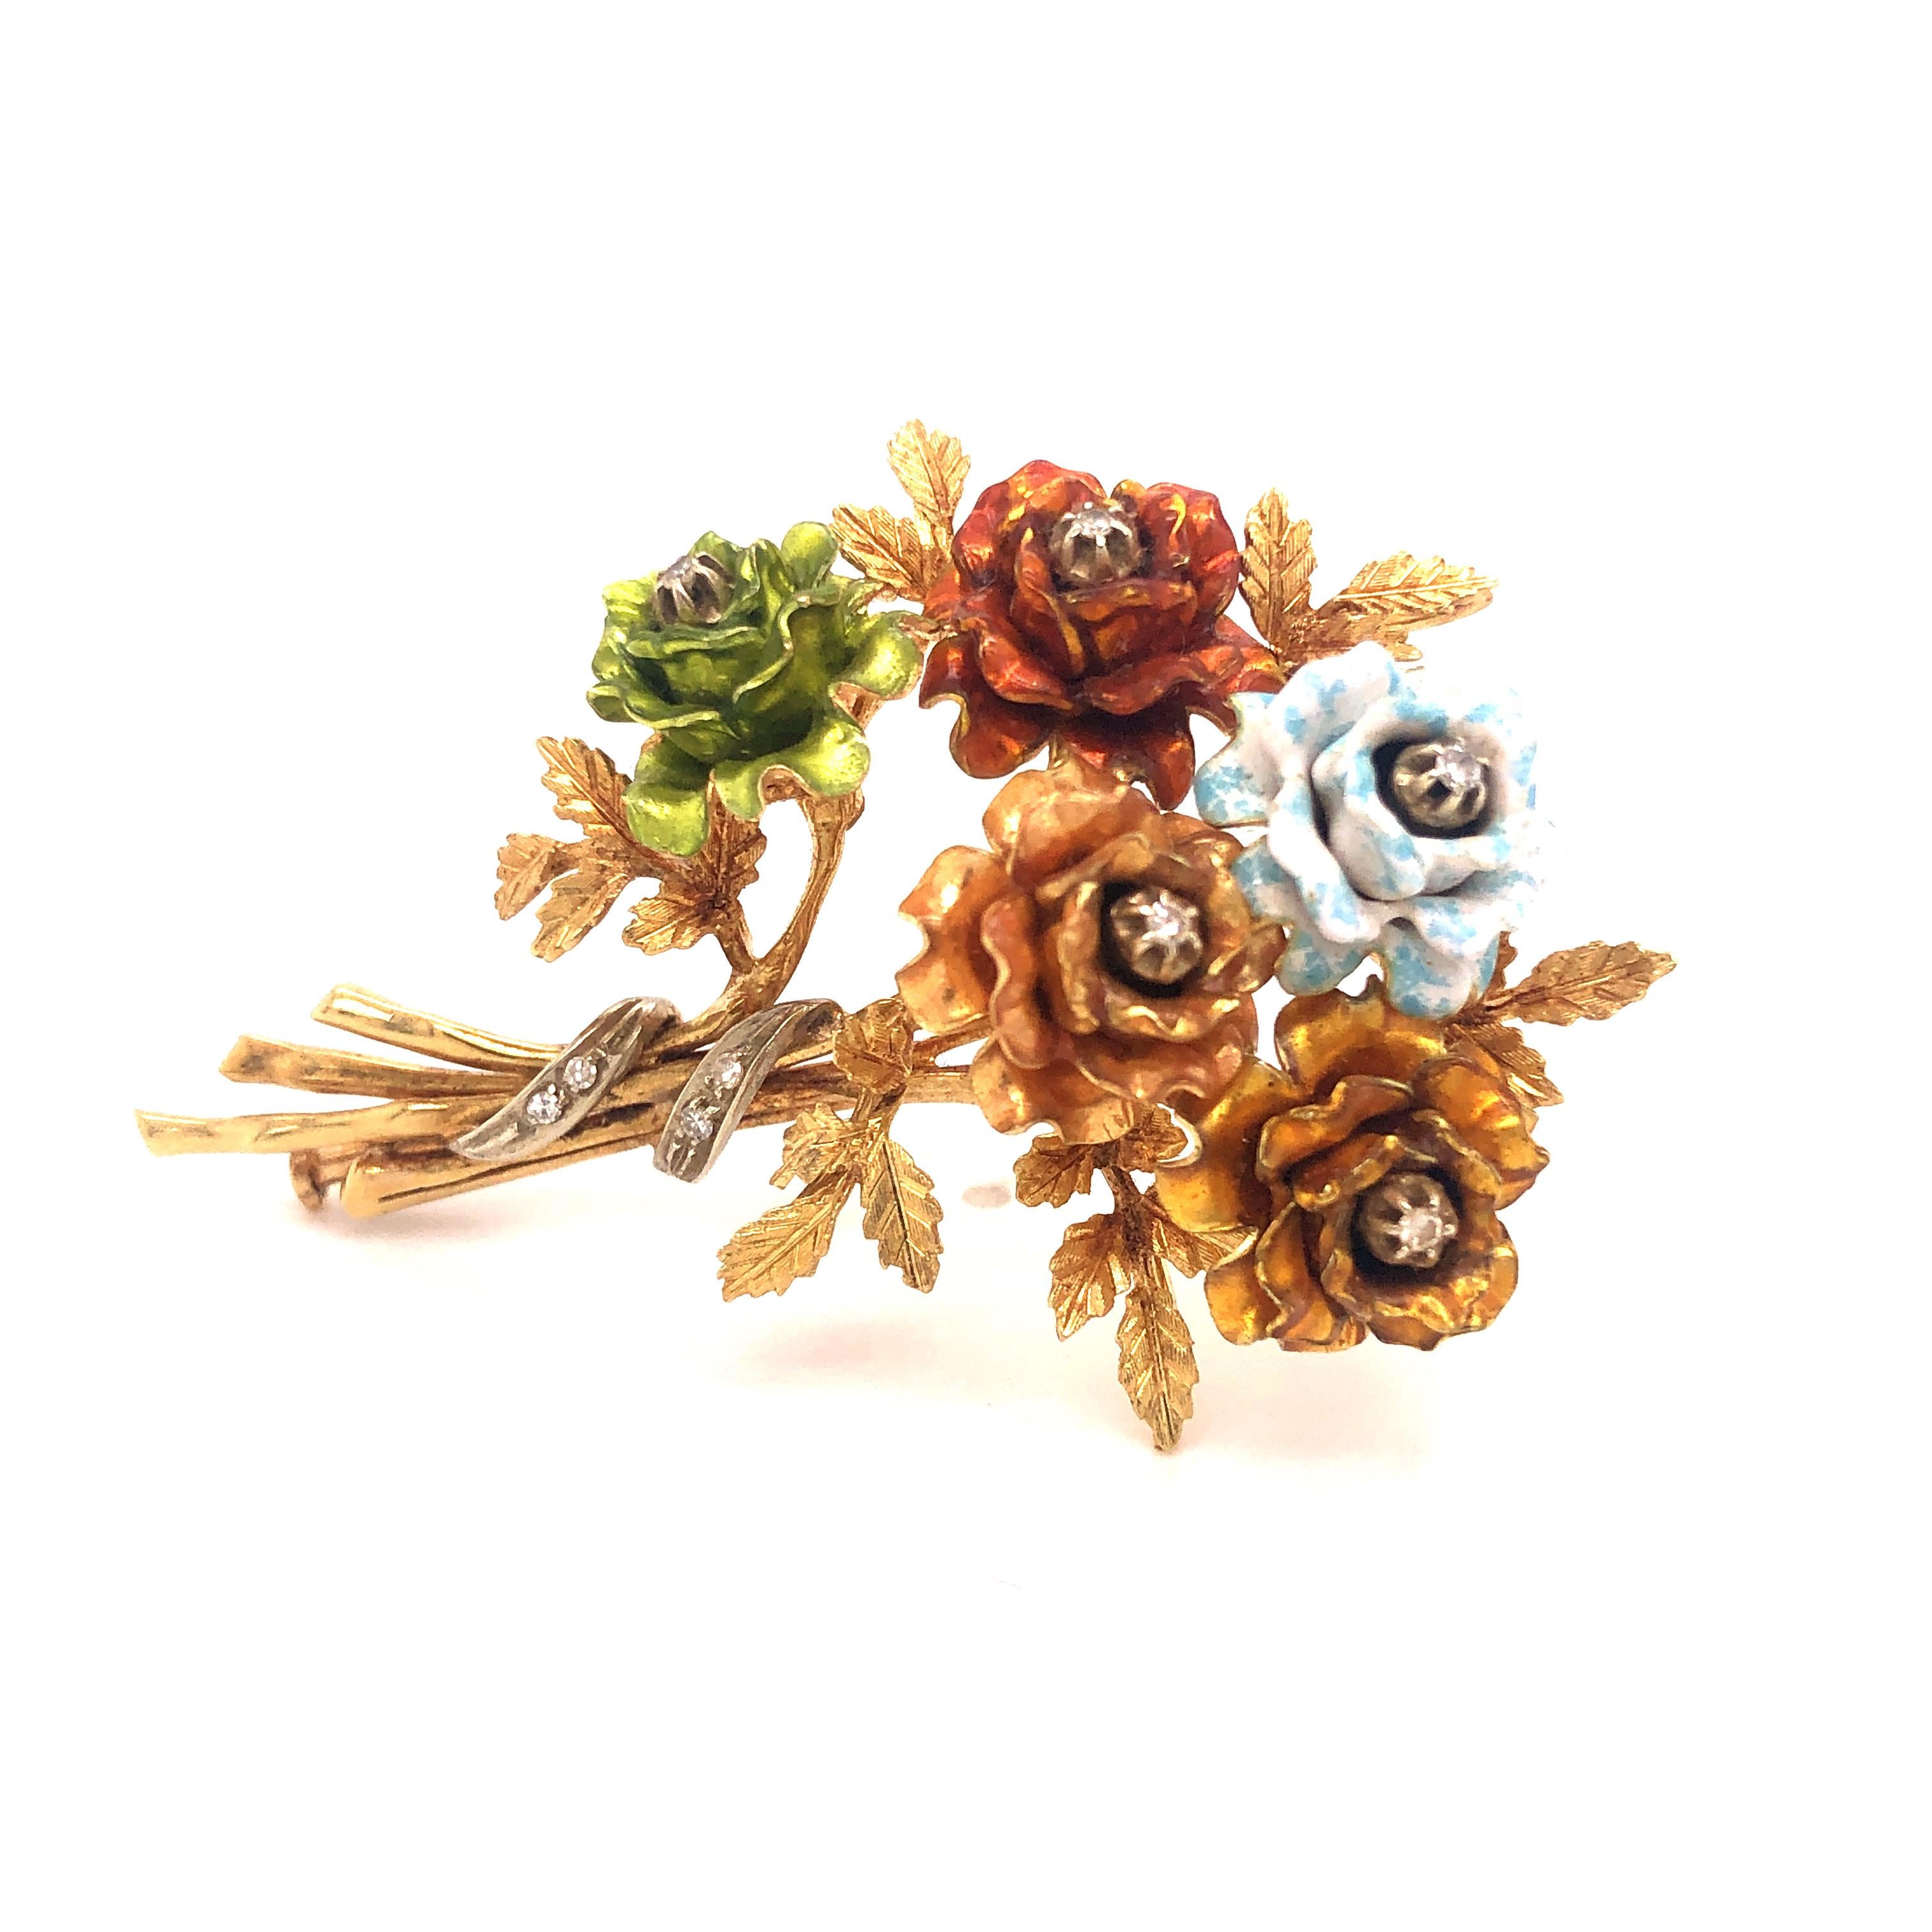 Gorgeous design crafted in 18k yellow gold. This floral brooch shows detail throughout. The highlight of the piece is the colored enamel that decorates the flower petals, allowing this piece to truly pop with color when worn. Details are seen in the